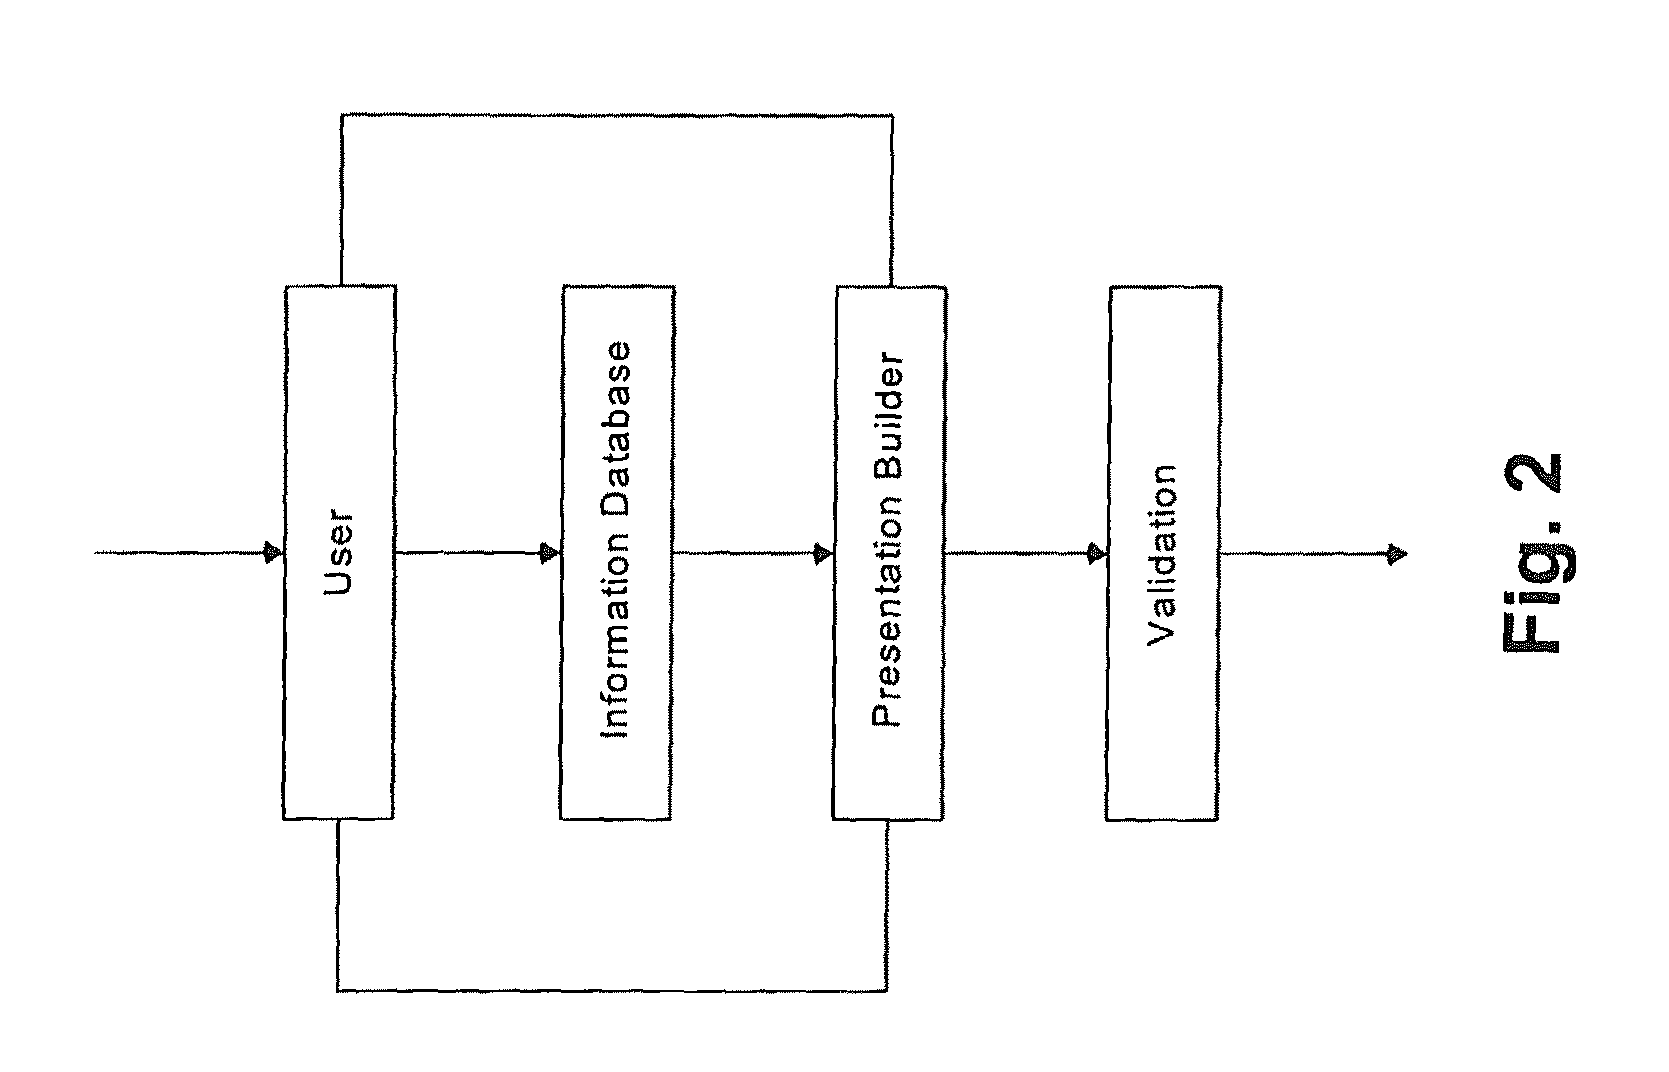 System and method for distributing and creating presentations